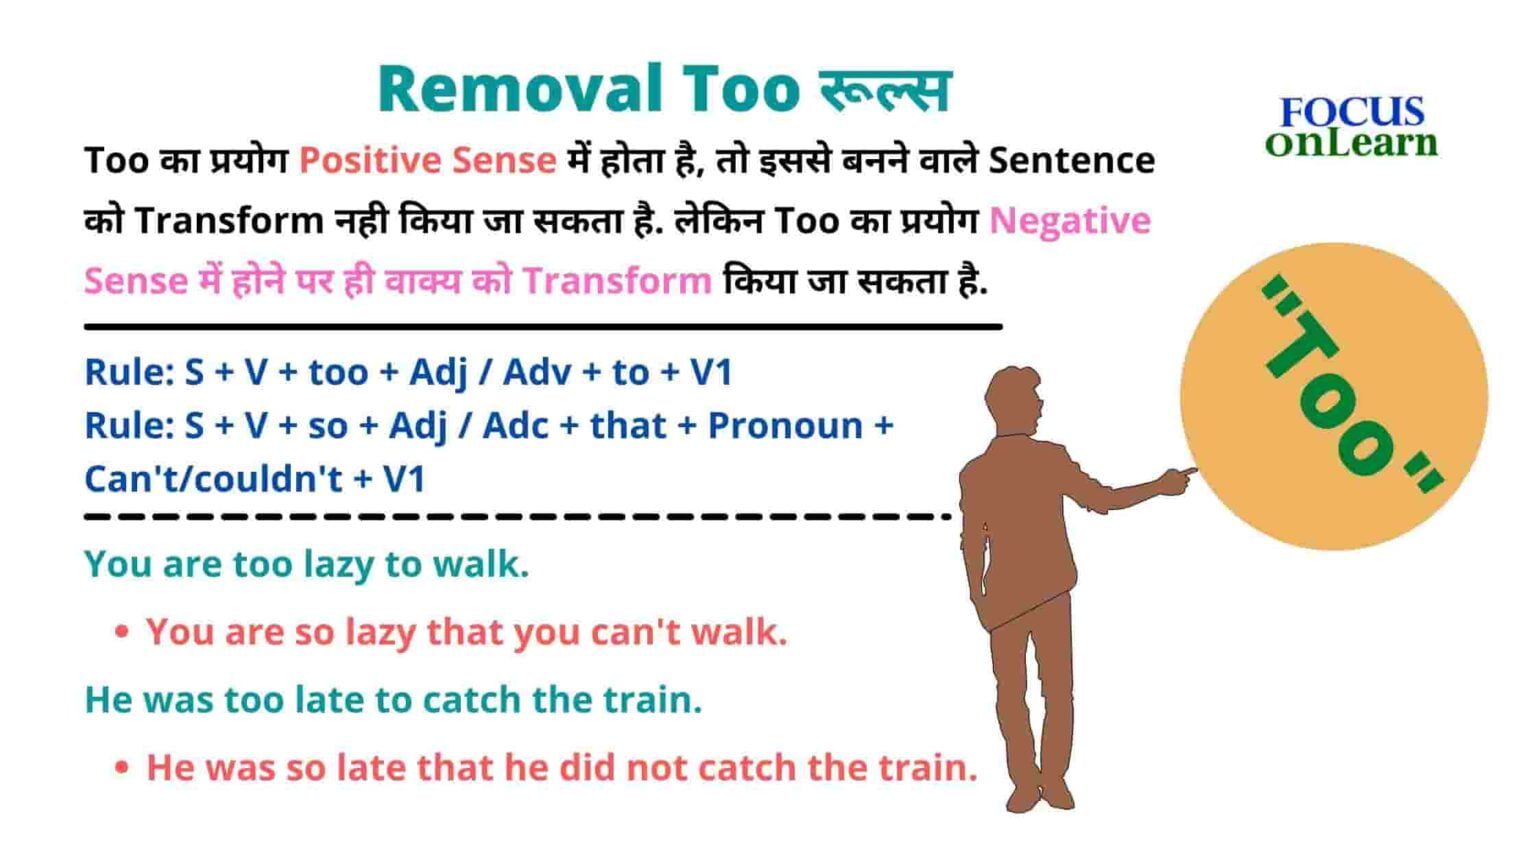 Remove Too Rules In Hindi Removal Too उदाहरण